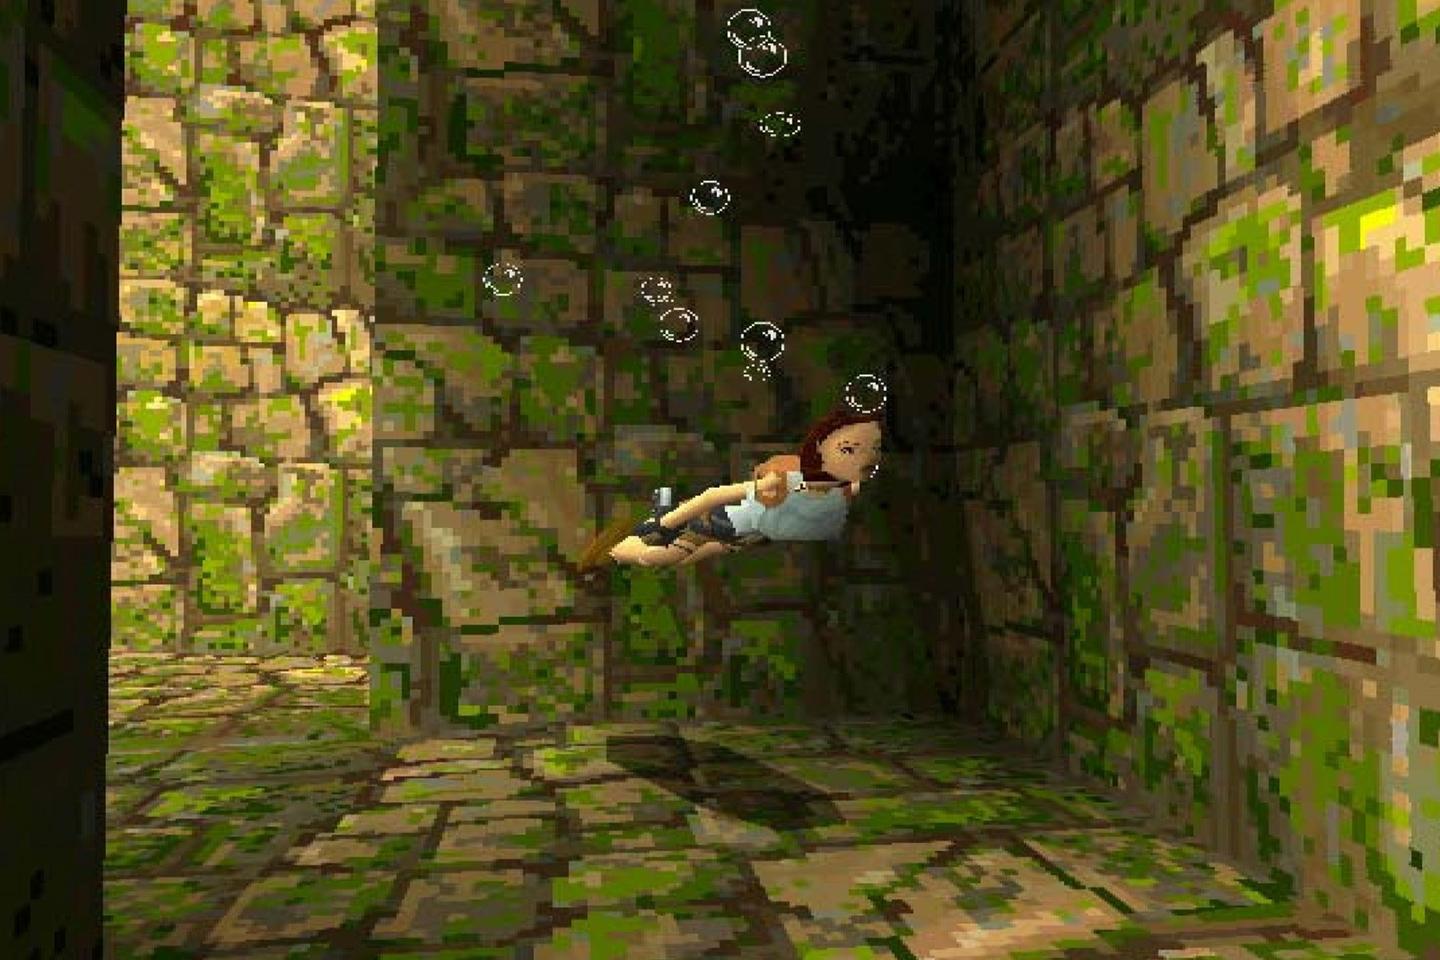 Lara floating among bubbles in a mossy, rock-walled tomb.